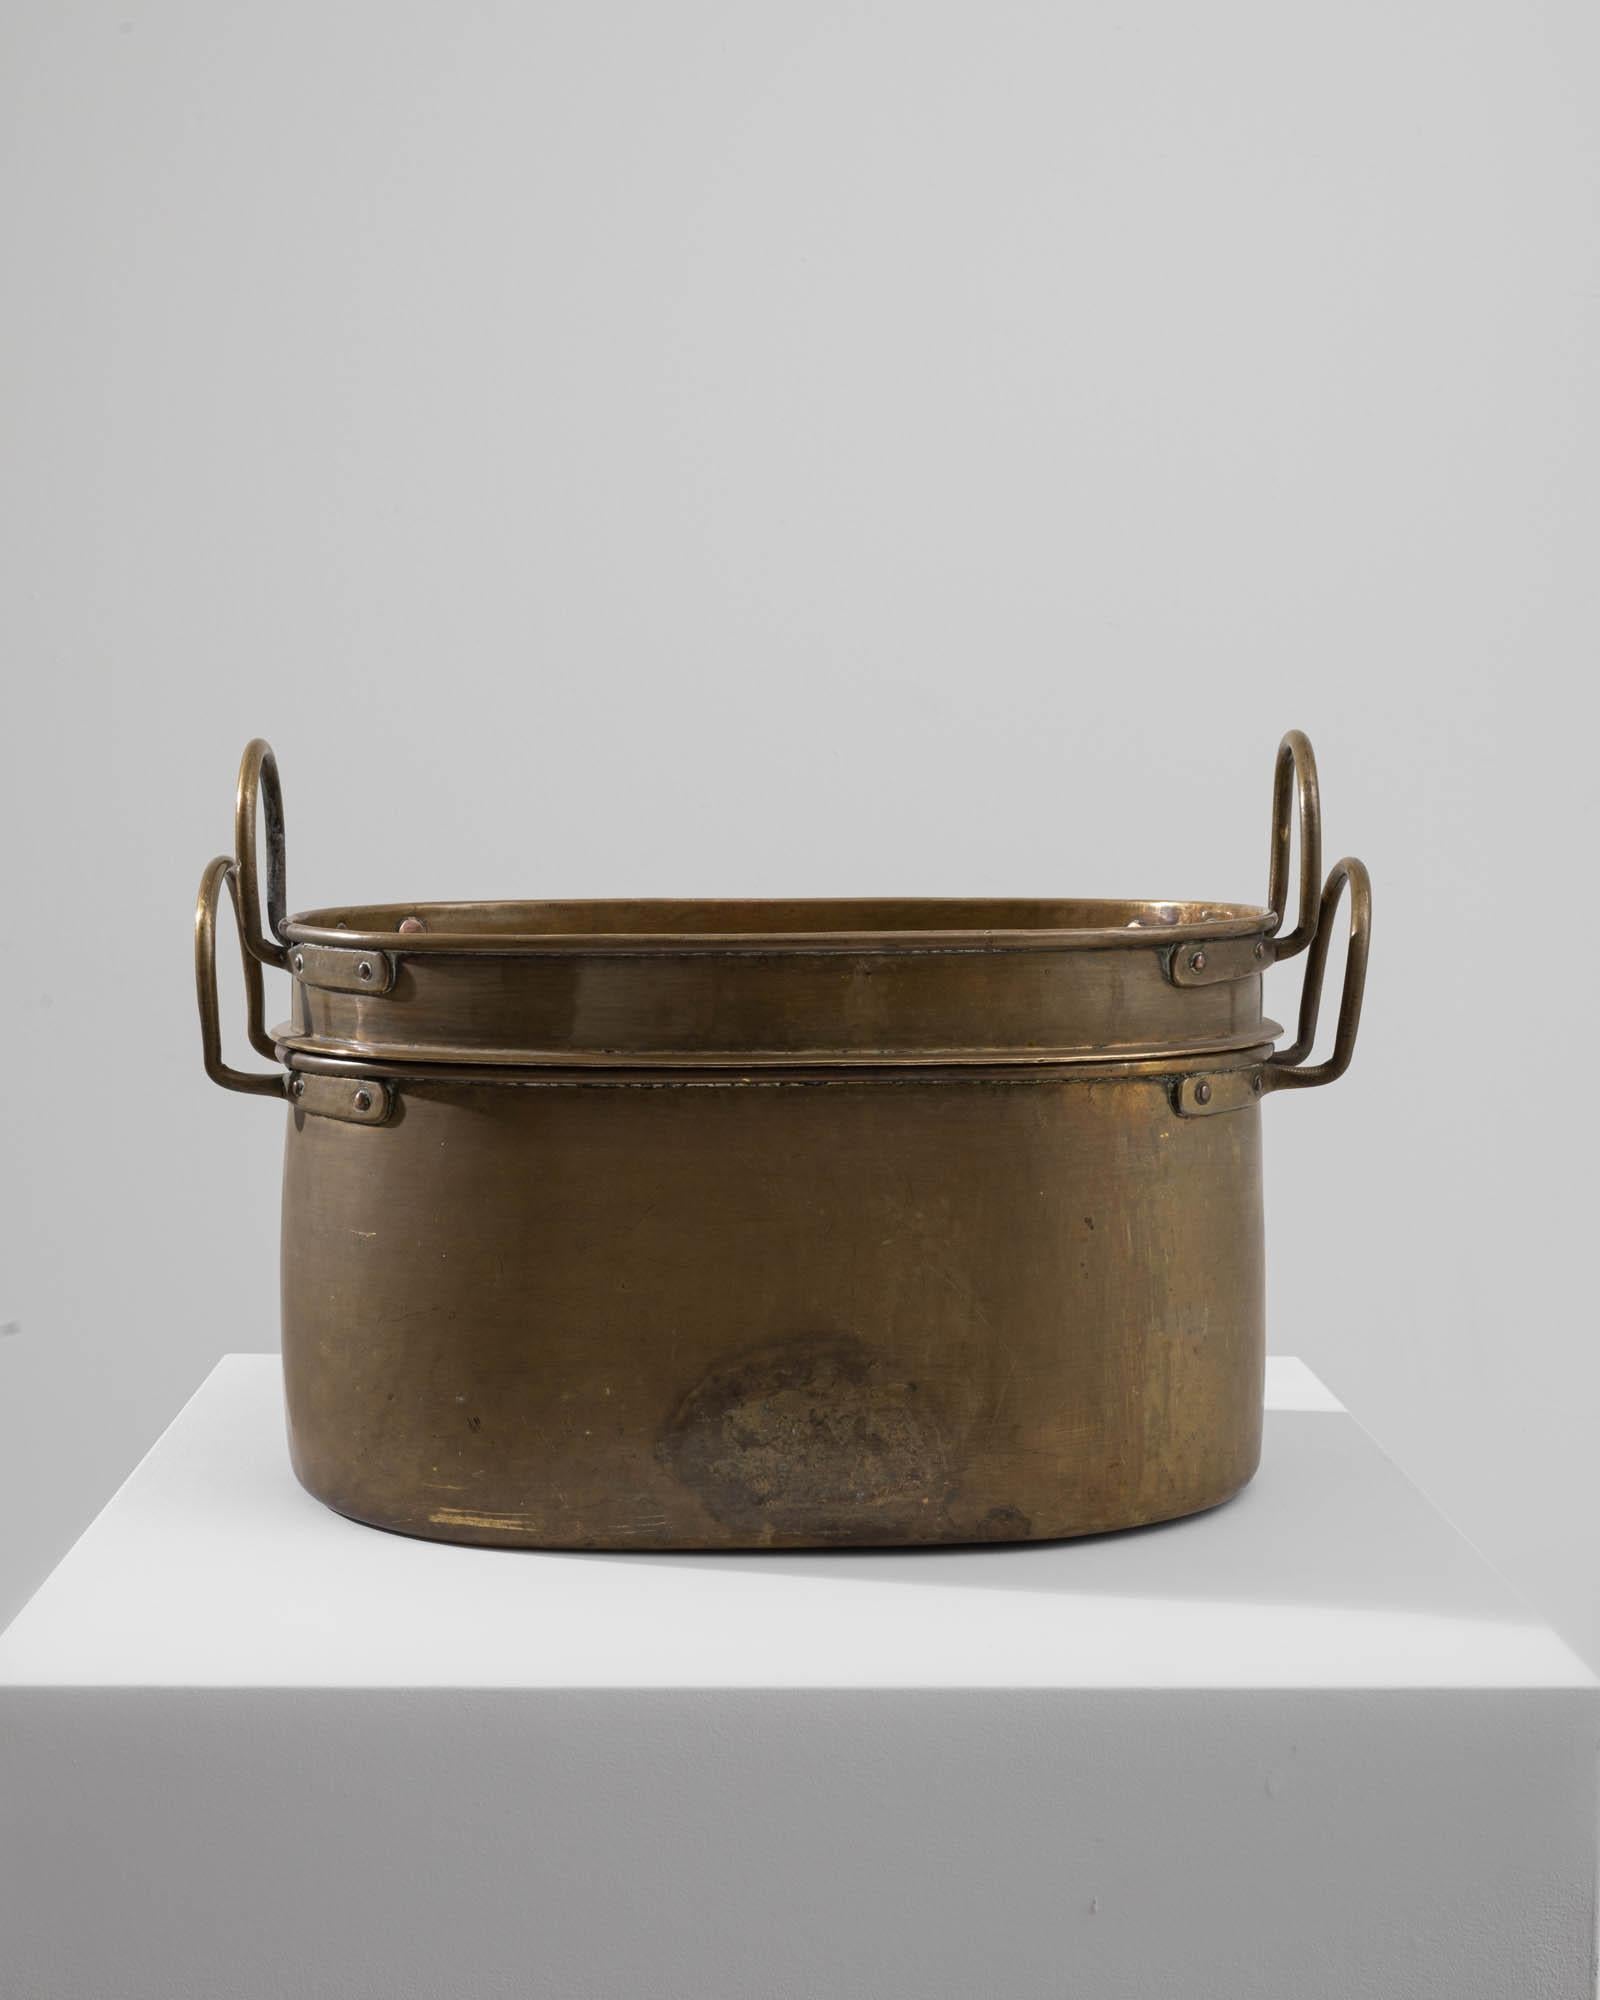 A metal pot with a lid created in 19th century France. Expertly crafted, and expelling a sense of articulate design, this unique pot captures one’s attention immediately. With a smaller companion pot, the sharp design sensibility employed in its